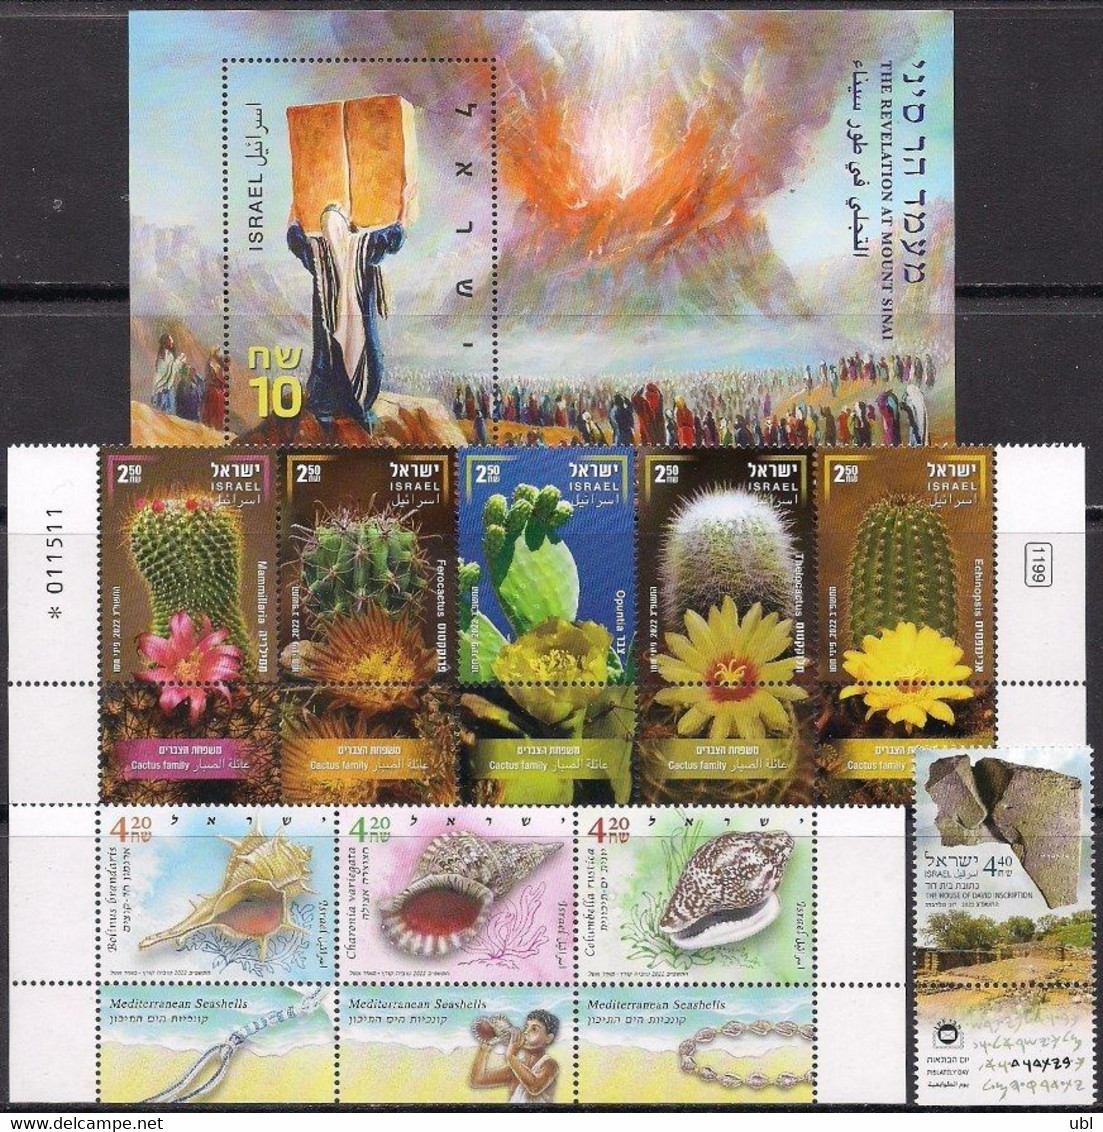 ISRAEL 2022 YEARBOOK - THE COMPLETE ANNUAL STAMPS & SOUVENIR SHEET ISSUE IN A DECORATIVE ALBUM - Colecciones & Series